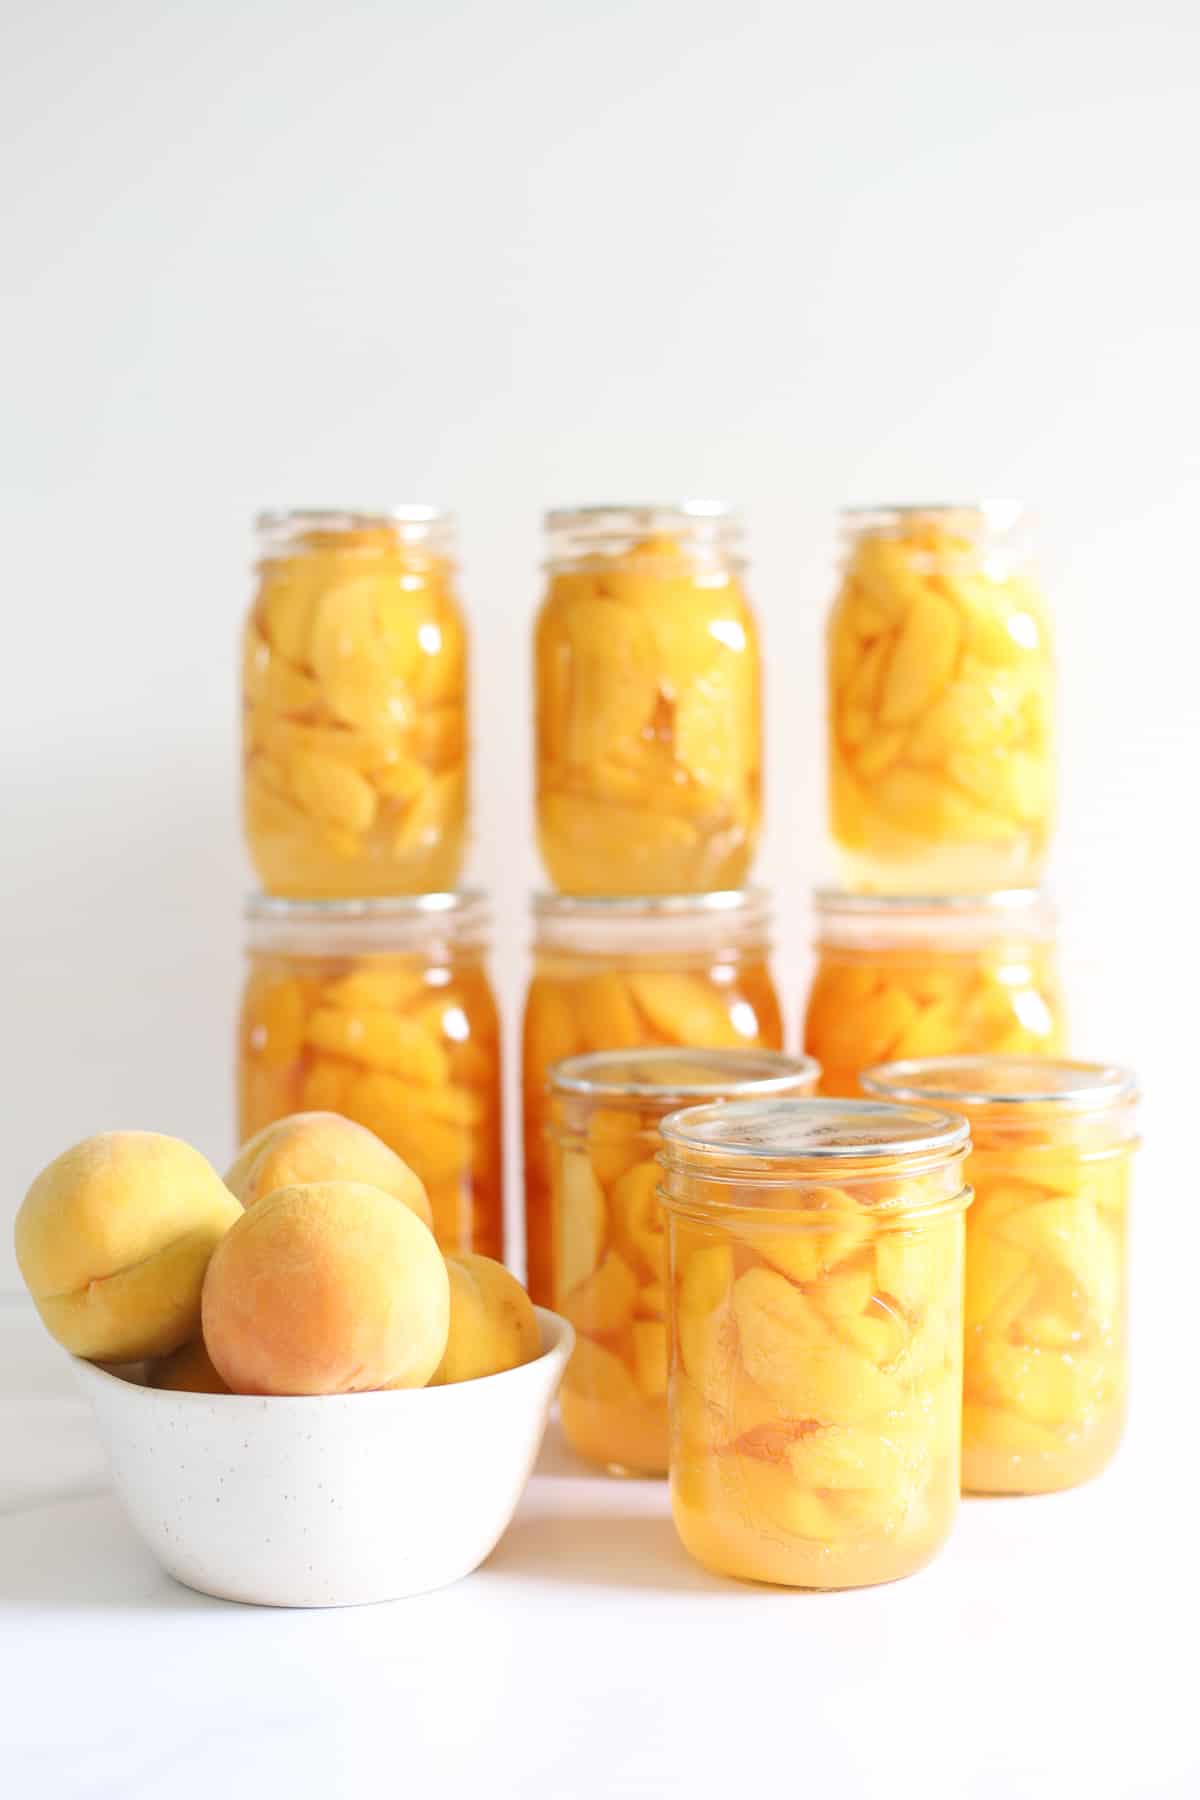 Jars of bottled peaches with a bowl of Golden Queen peaches on white background